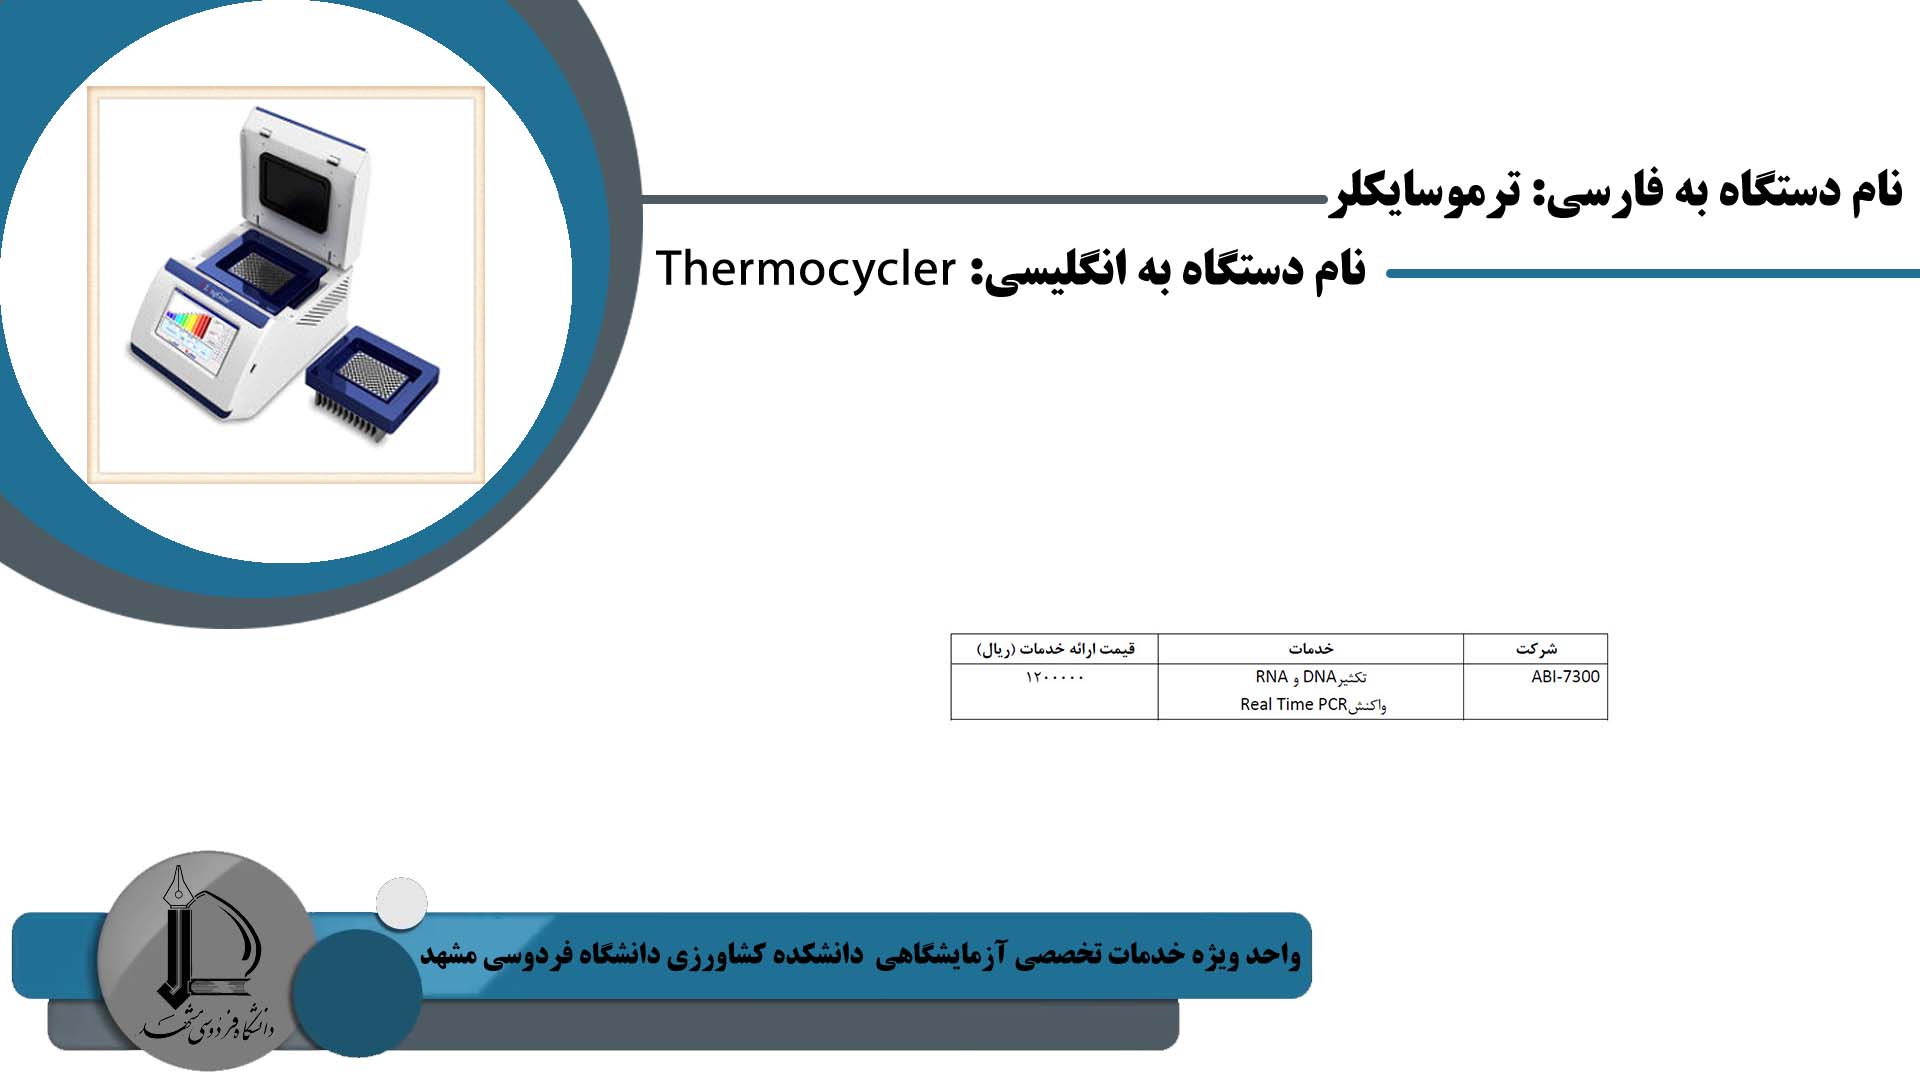 Thermocycler1